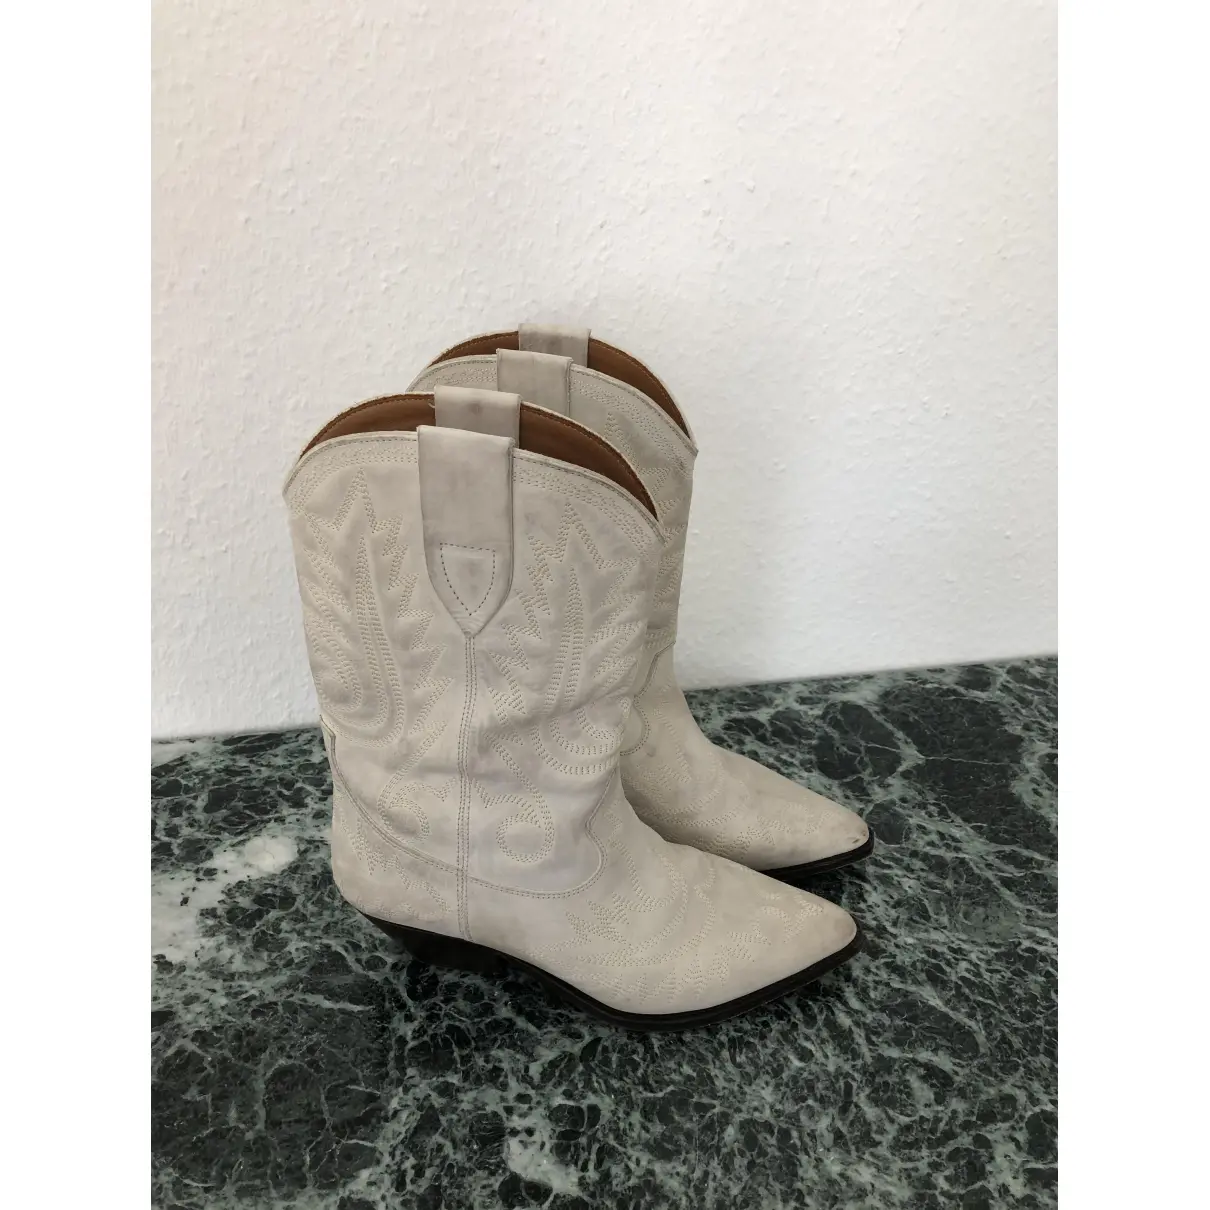 Buy Isabel Marant Duerto leather western boots online